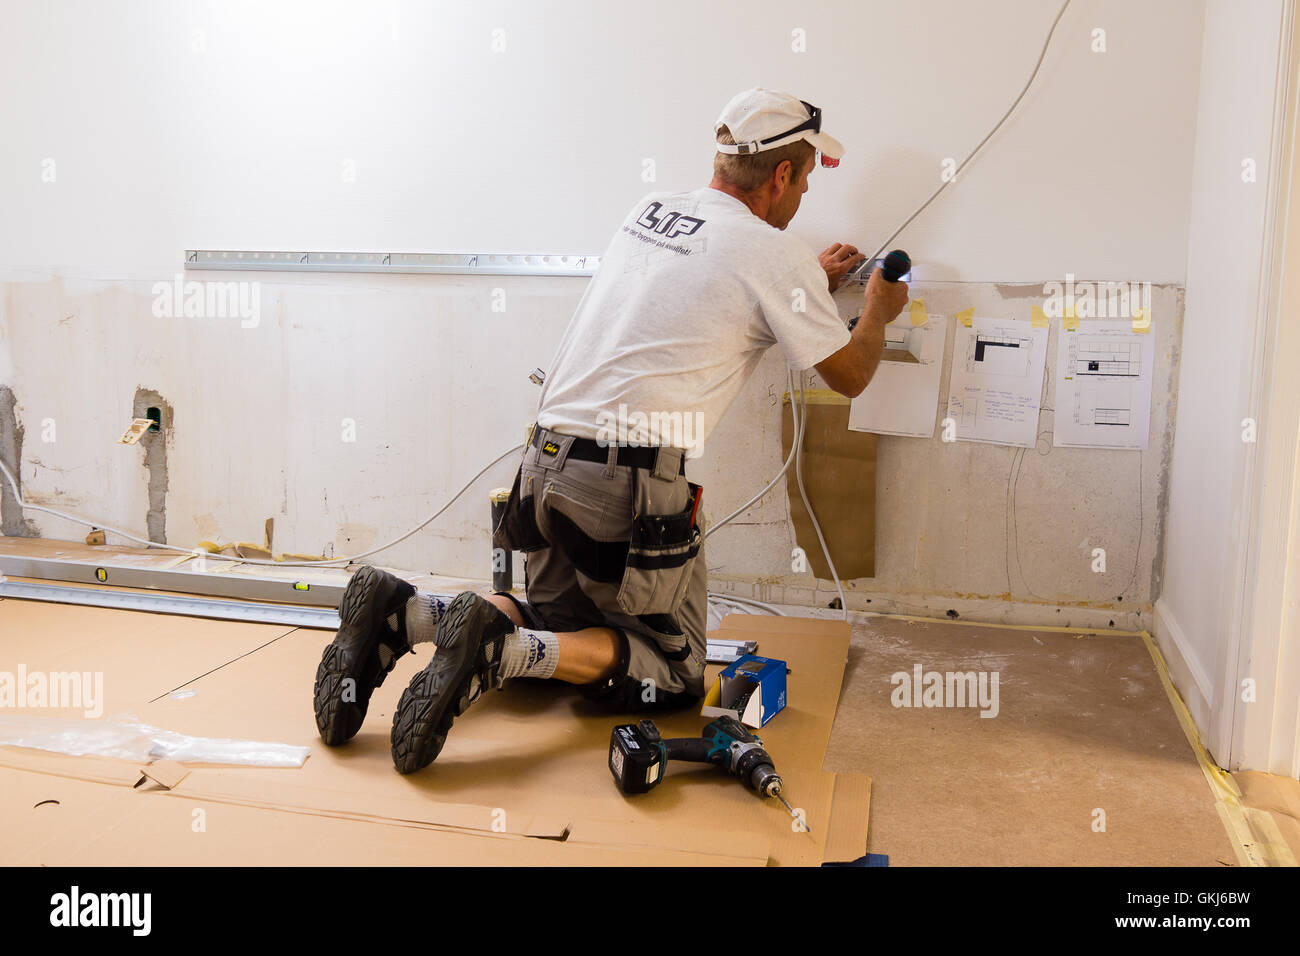 Carpenter mounting an IKEA kitchen with screwdriver and has blueprints on the wall. Stock Photo